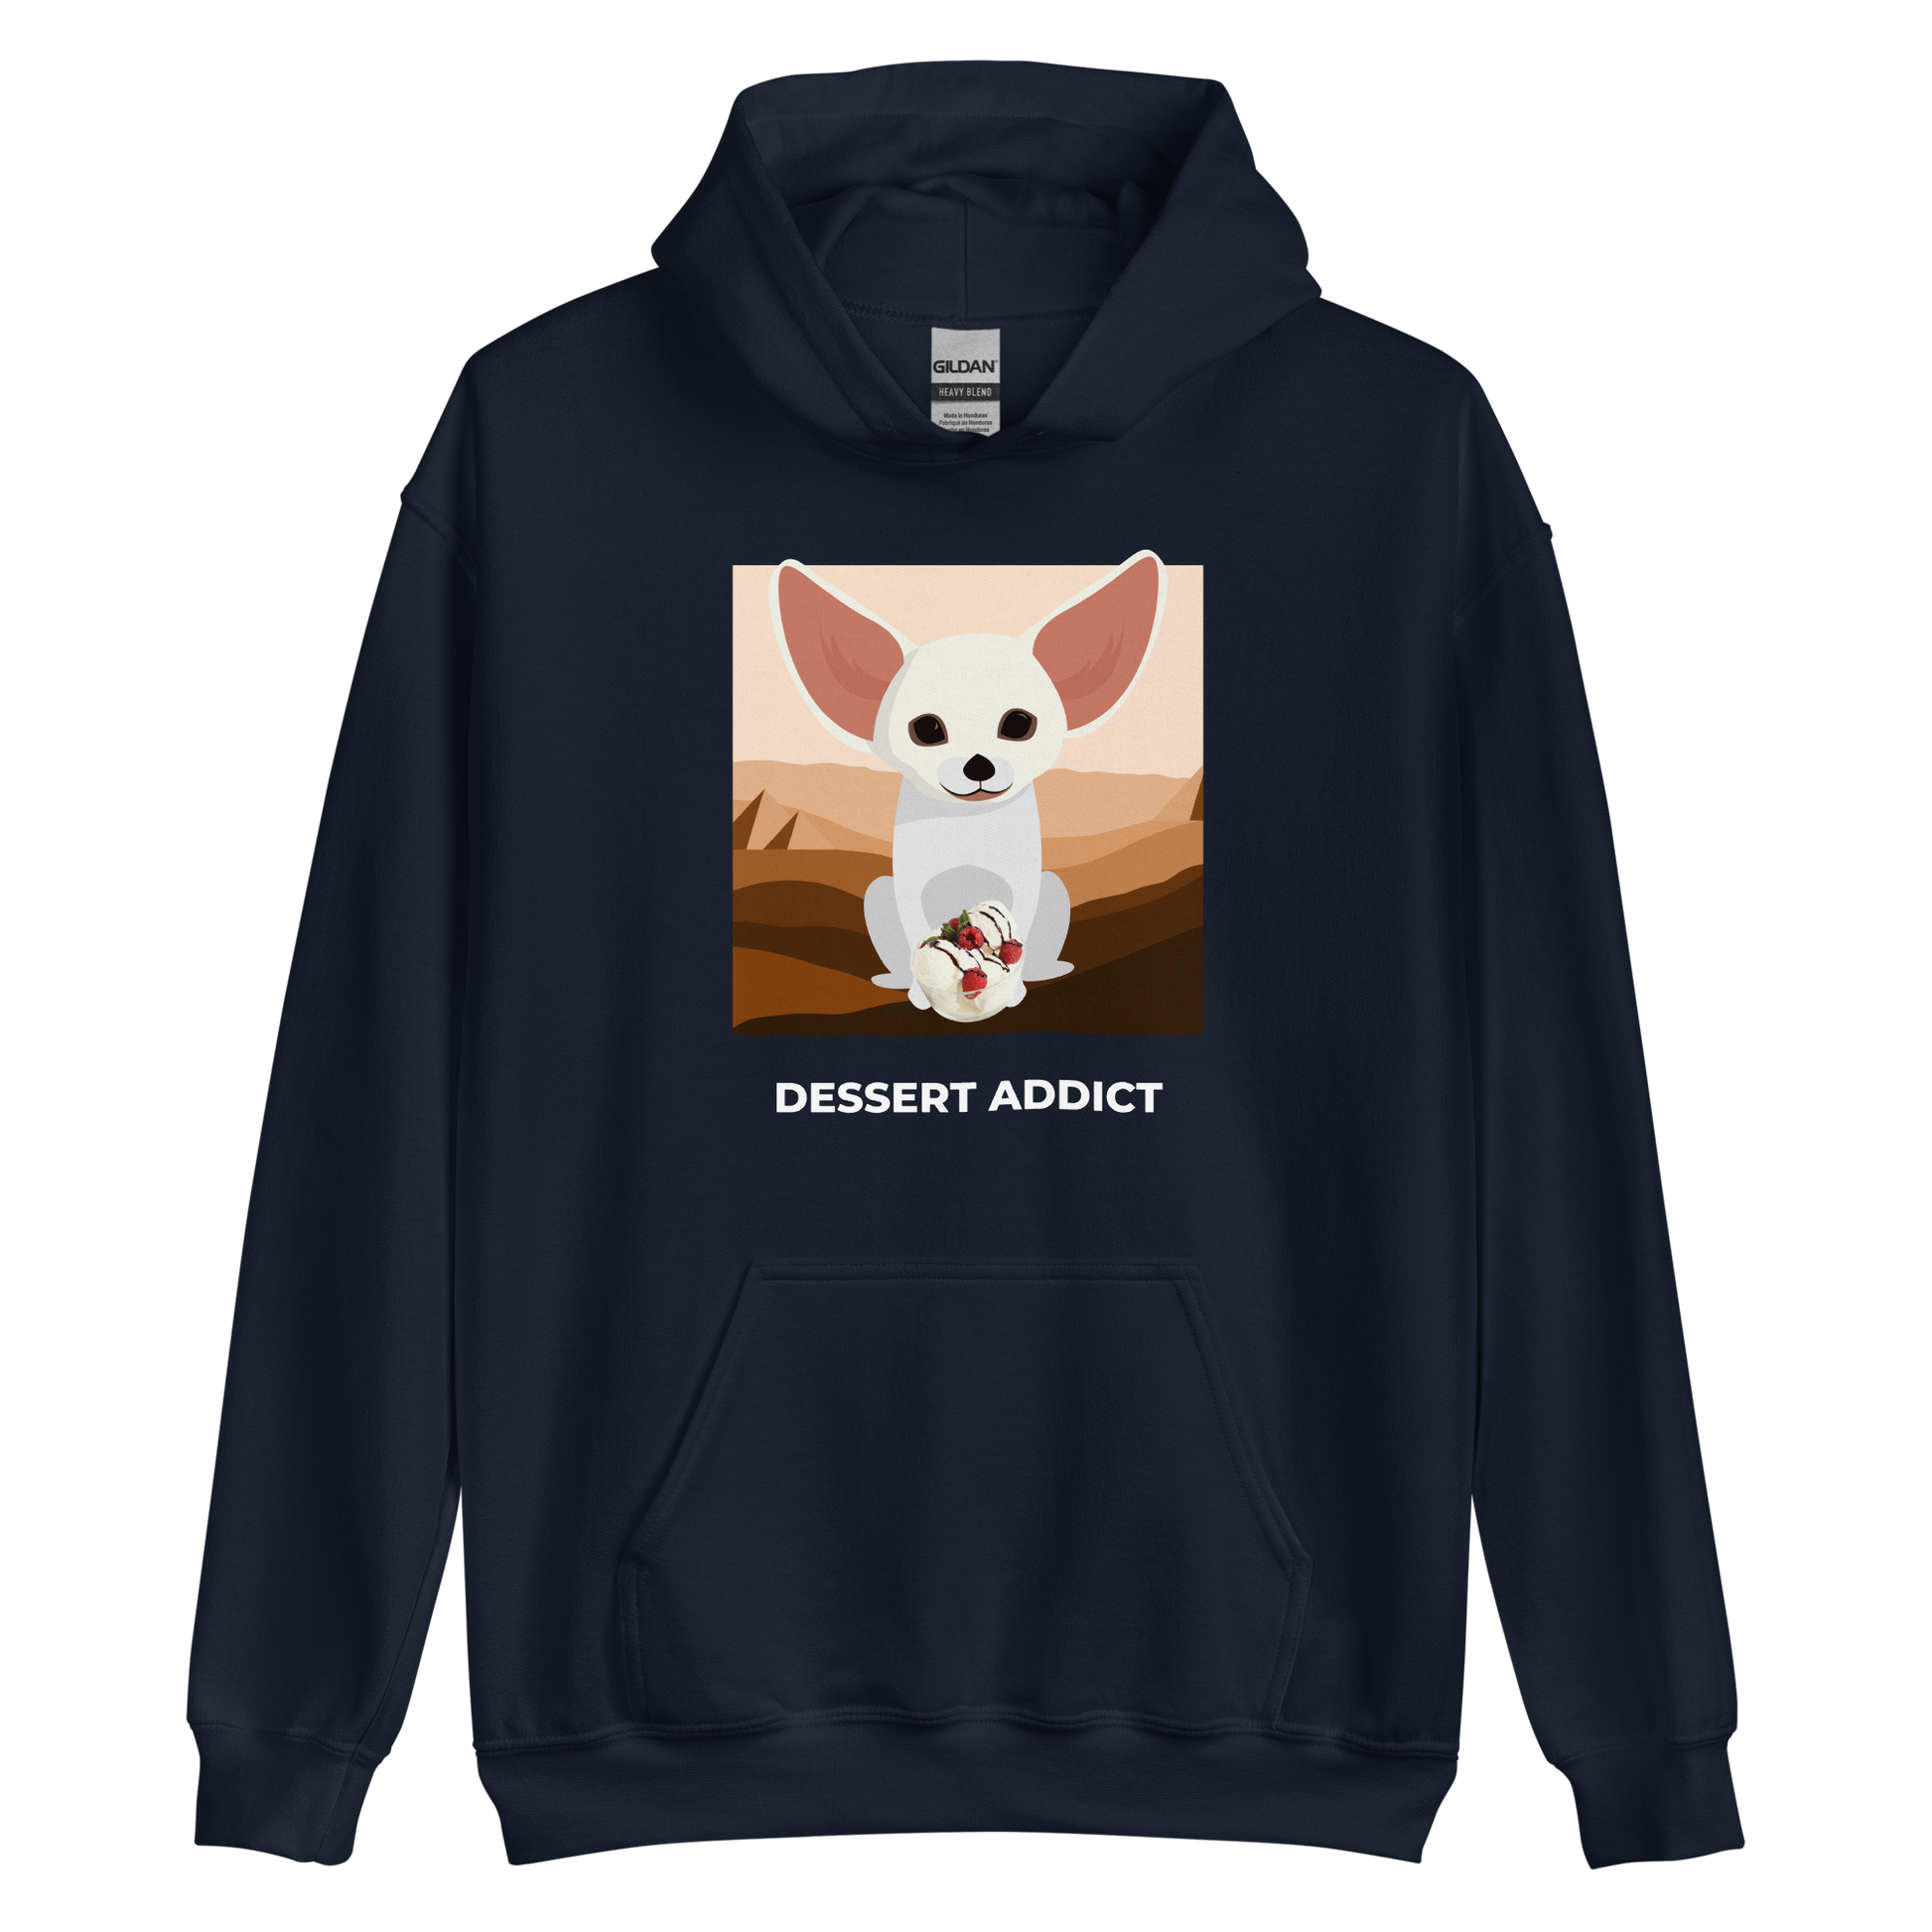 Navy Fennec Fox Hoodie featuring an adorable Dessert Addict graphic on the chest - Funny Graphic Fennec Fox Hoodies - Boozy Fox